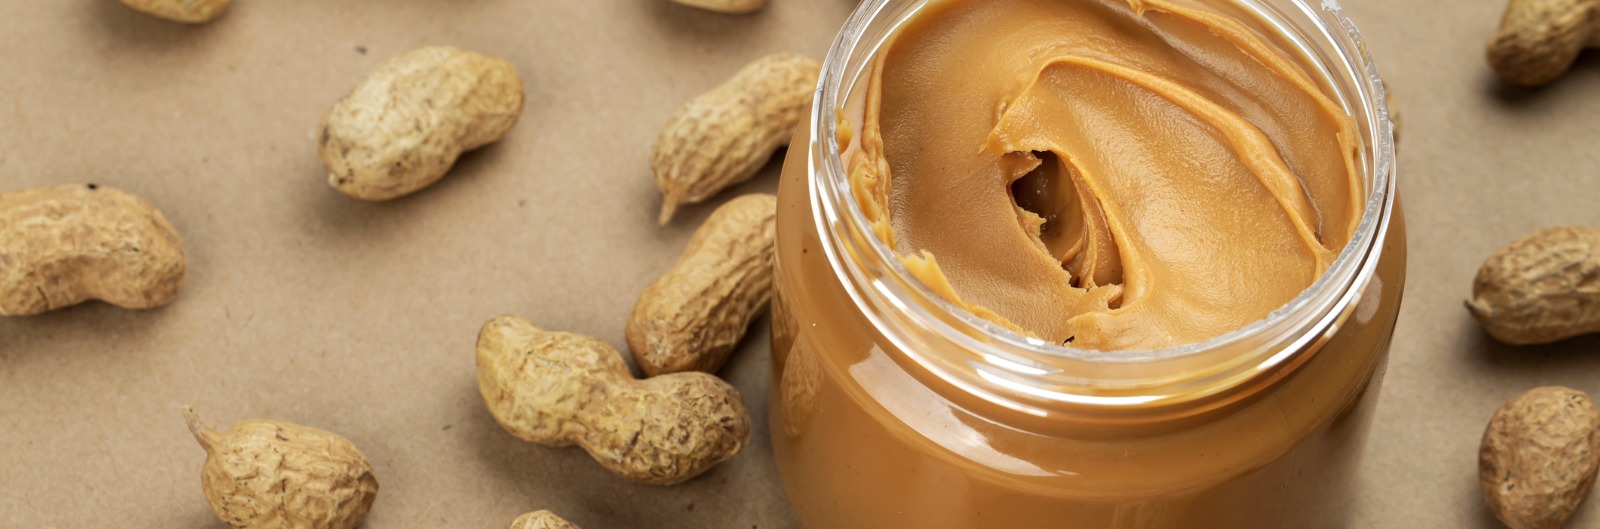 creamy-and-smooth-peanut-butter-in-jar-on-paper-table-picture-1600x529.jpg